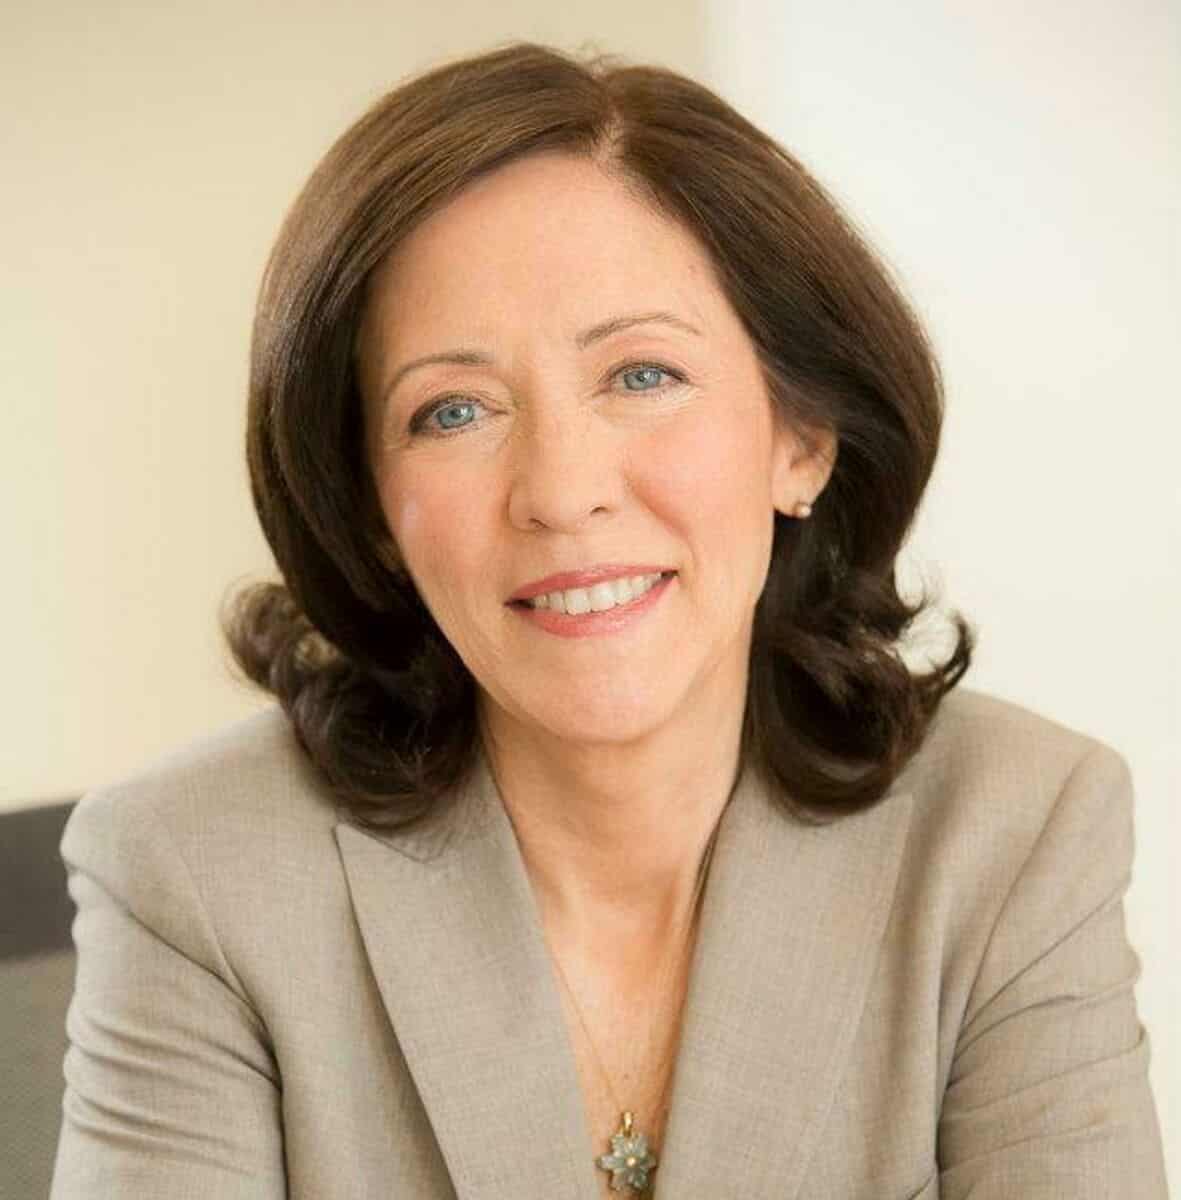 Maria Cantwell - Famous Politician